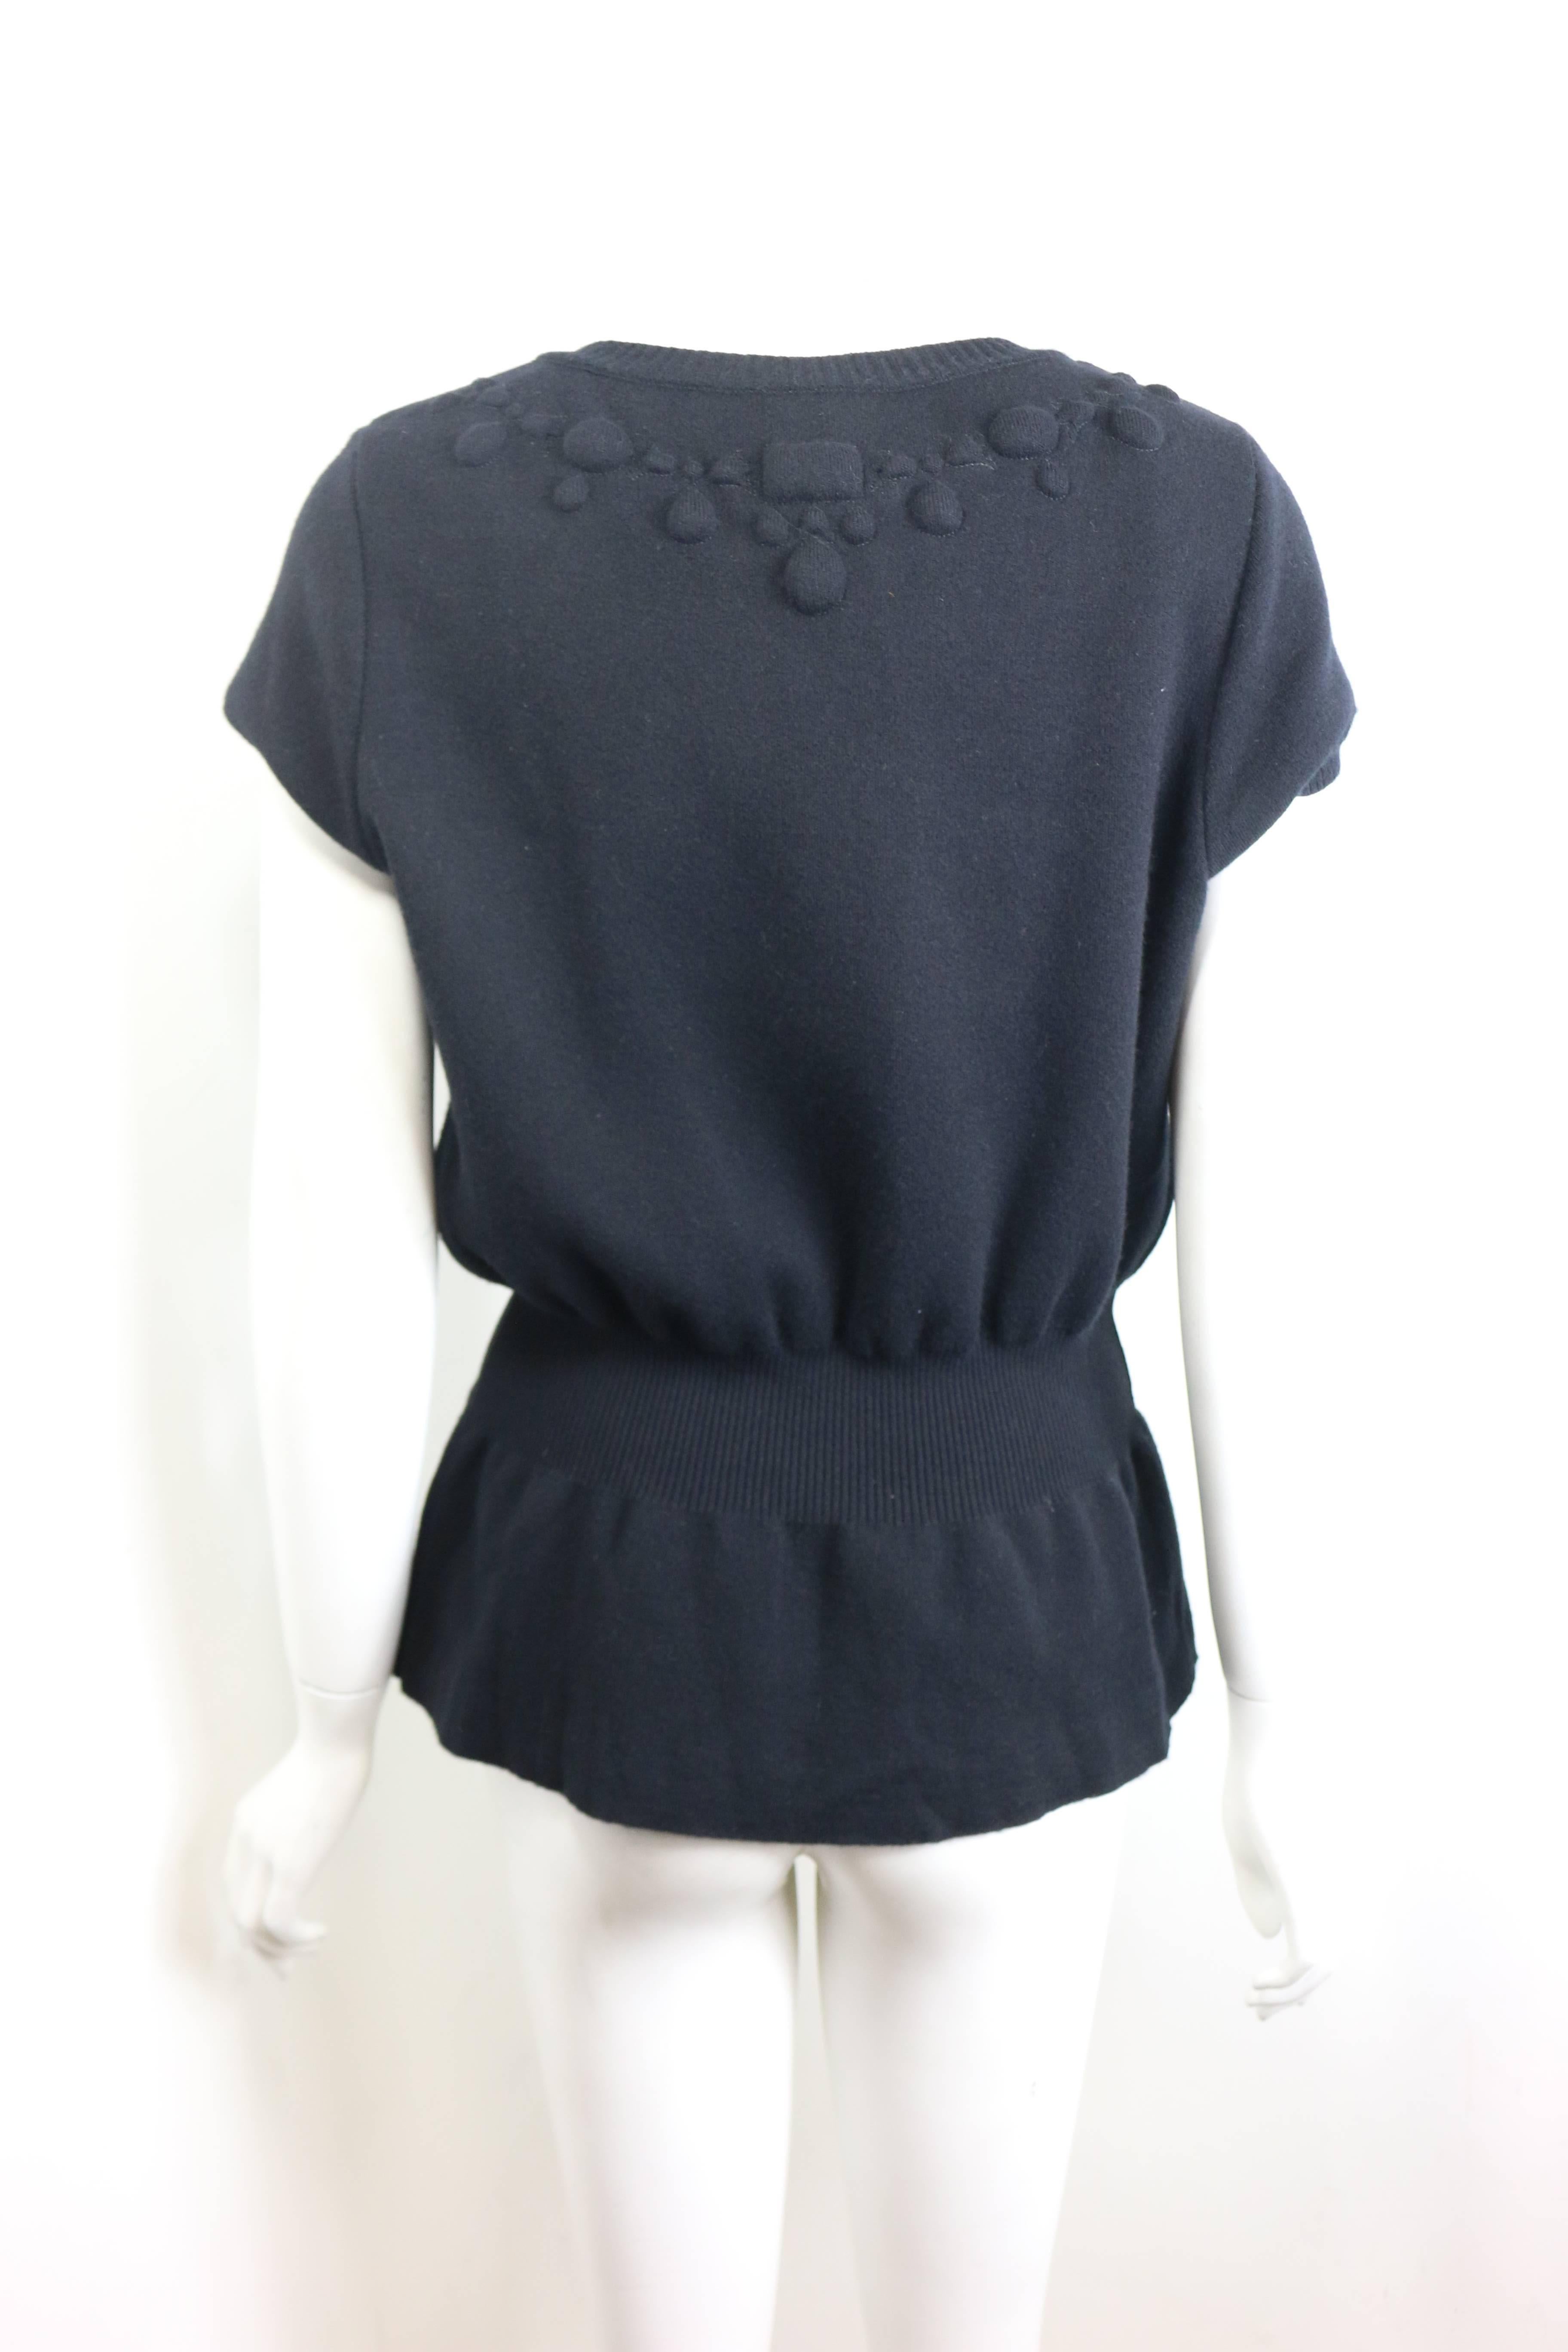 Chanel Black Wool Short Sleeves Top In Excellent Condition For Sale In Sheung Wan, HK